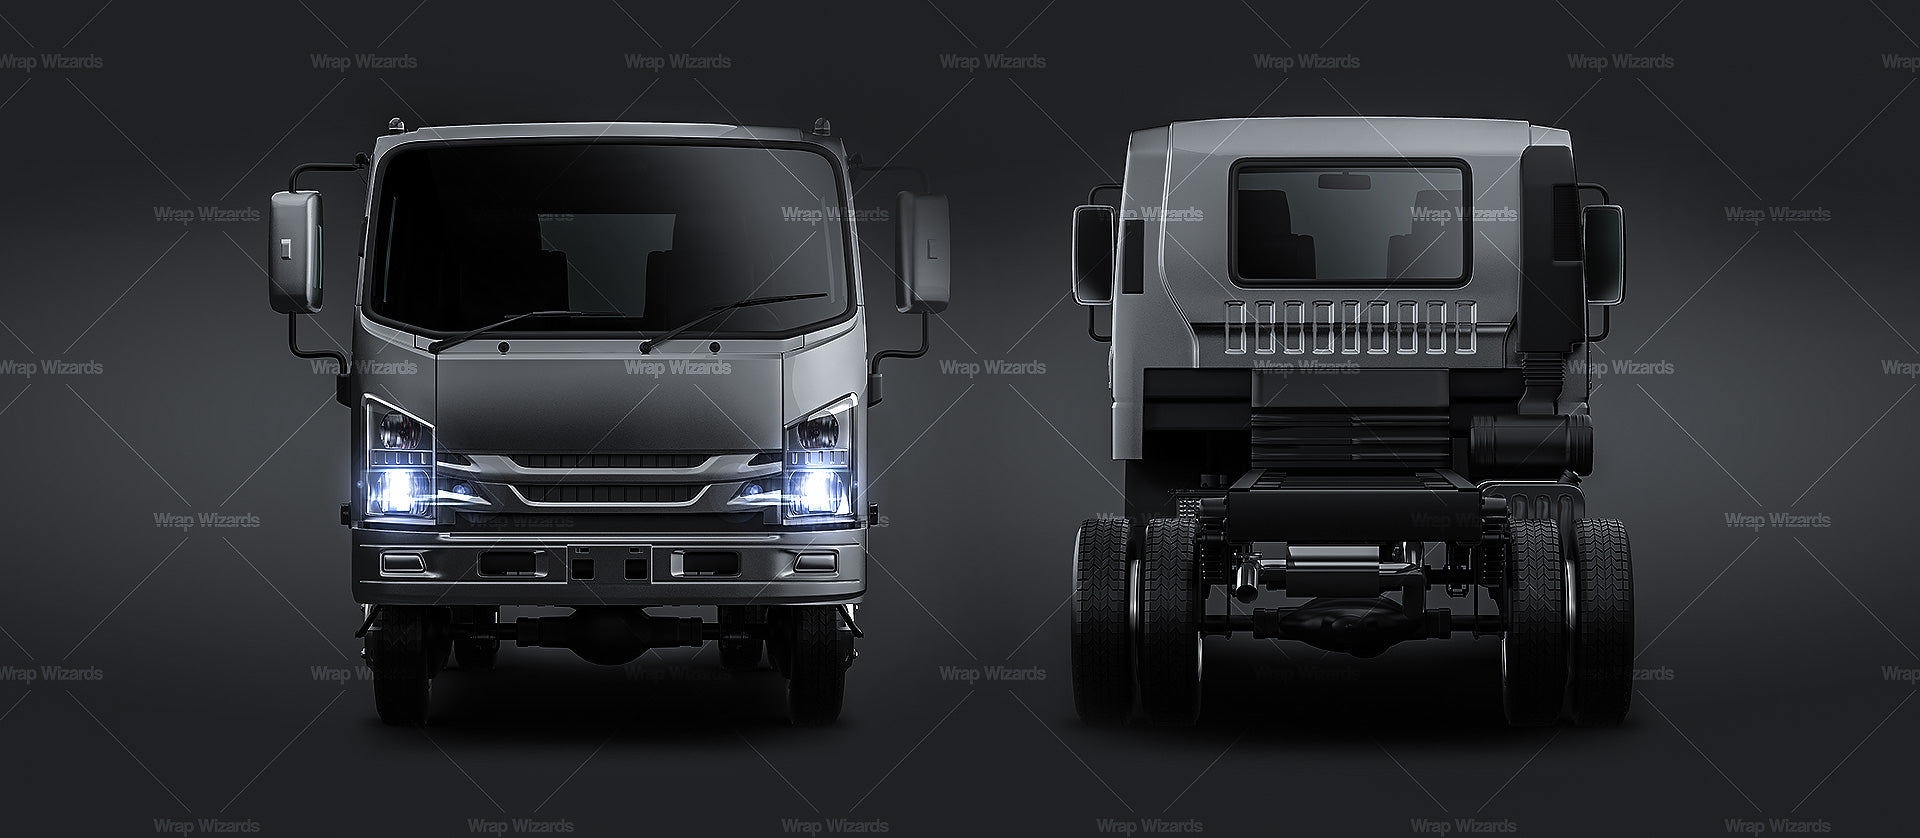 Isuzu NPS 300 chassis truck glossy finish - all sides Car Mockup Template.psd